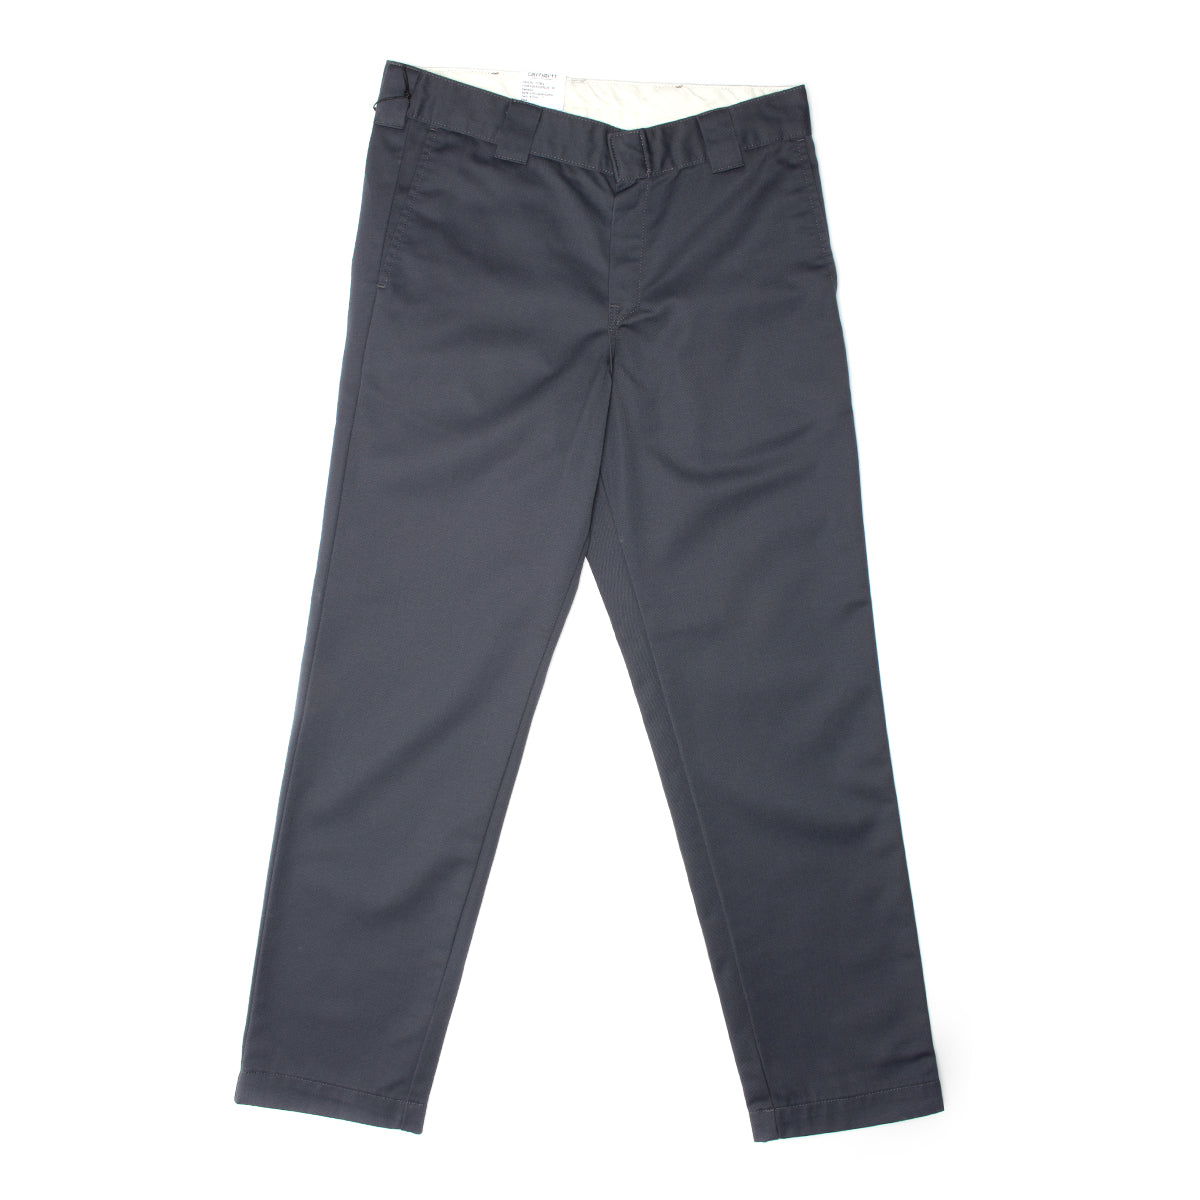 Carhartt WIP Simple Pant Trousers Zeus Blue Rinsed Denison Twill